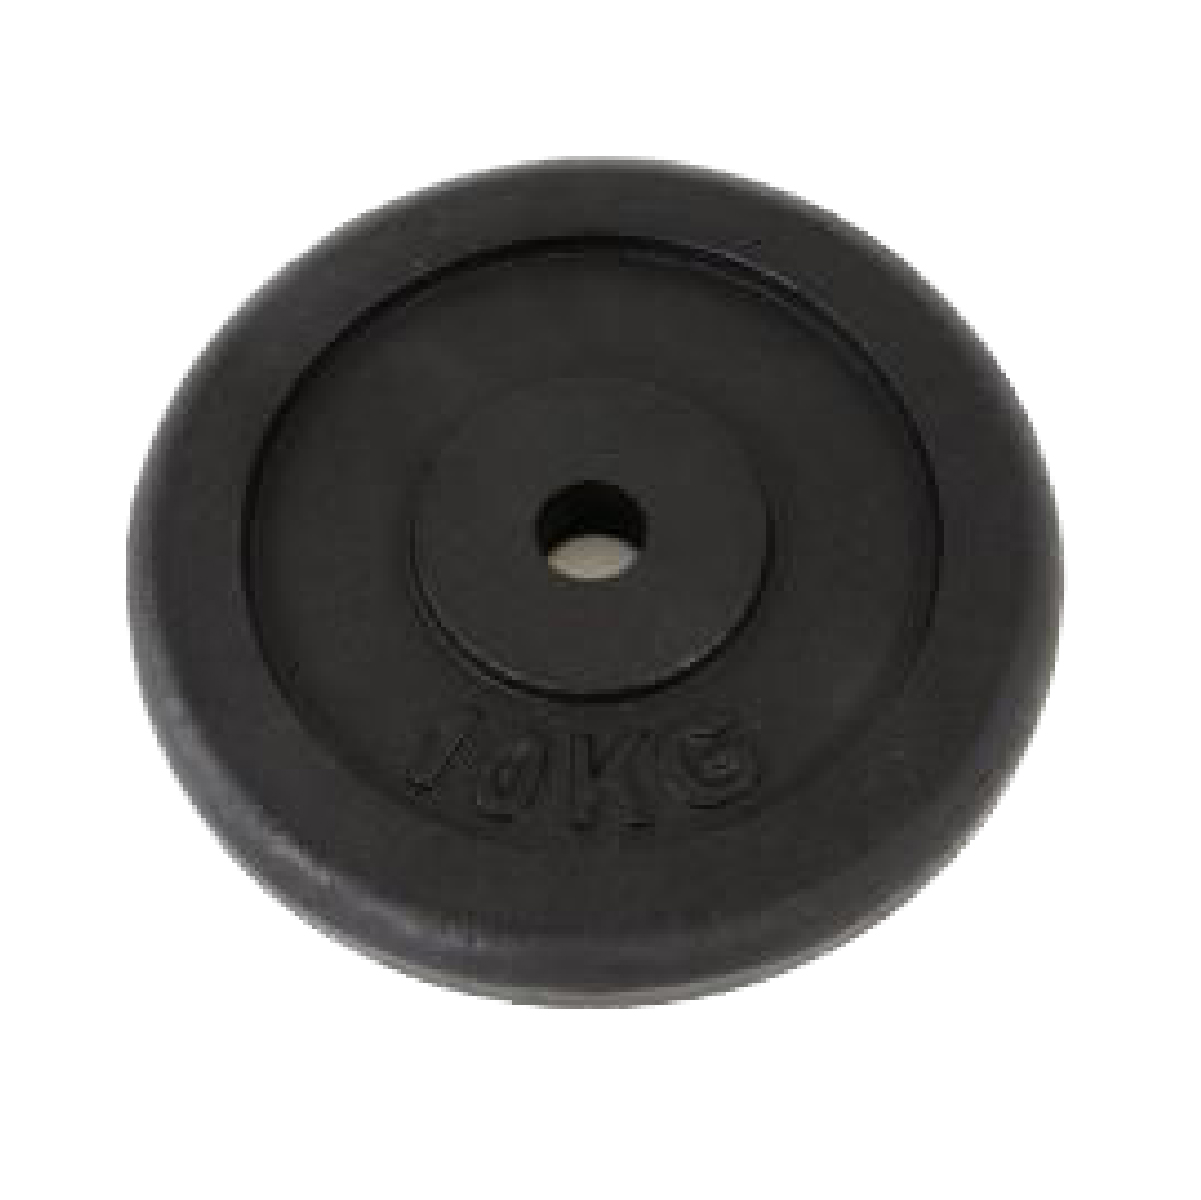 Rubber Coated Revolving Iron Plate 10KG 28MM, Circular, IR102710 